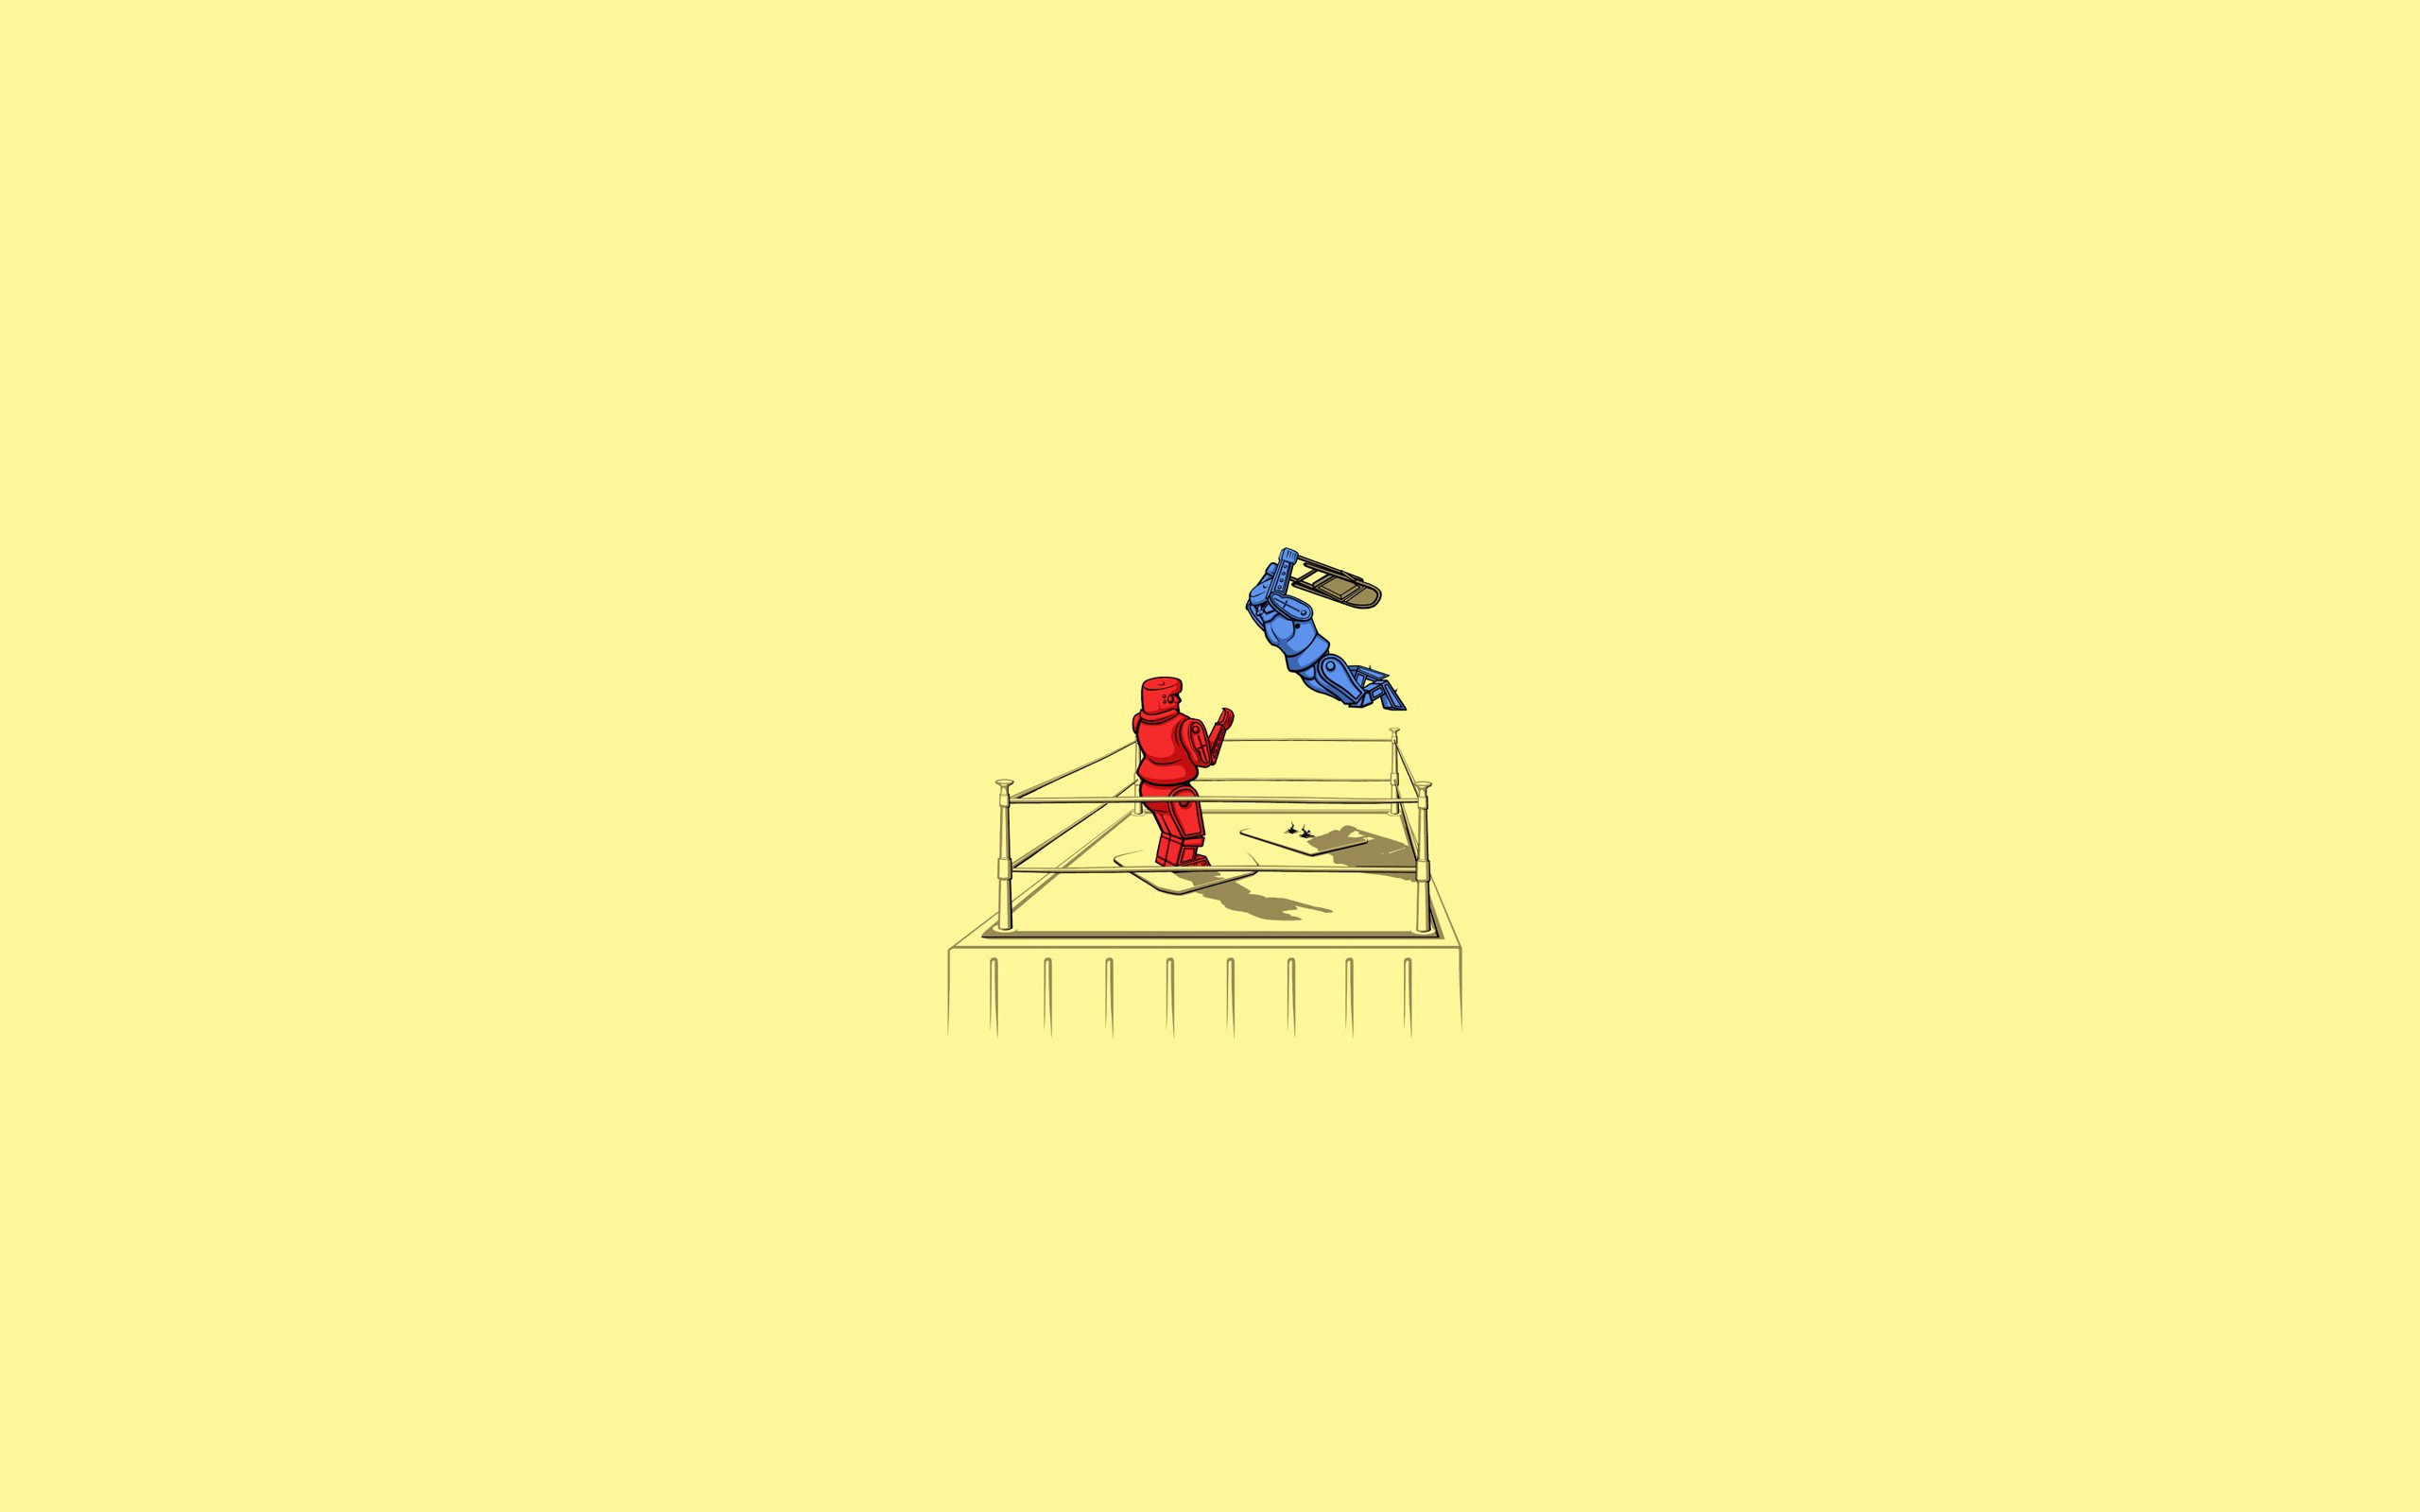 General 2560x1600 minimalism boxing simple background humor wrestling yellow background artwork